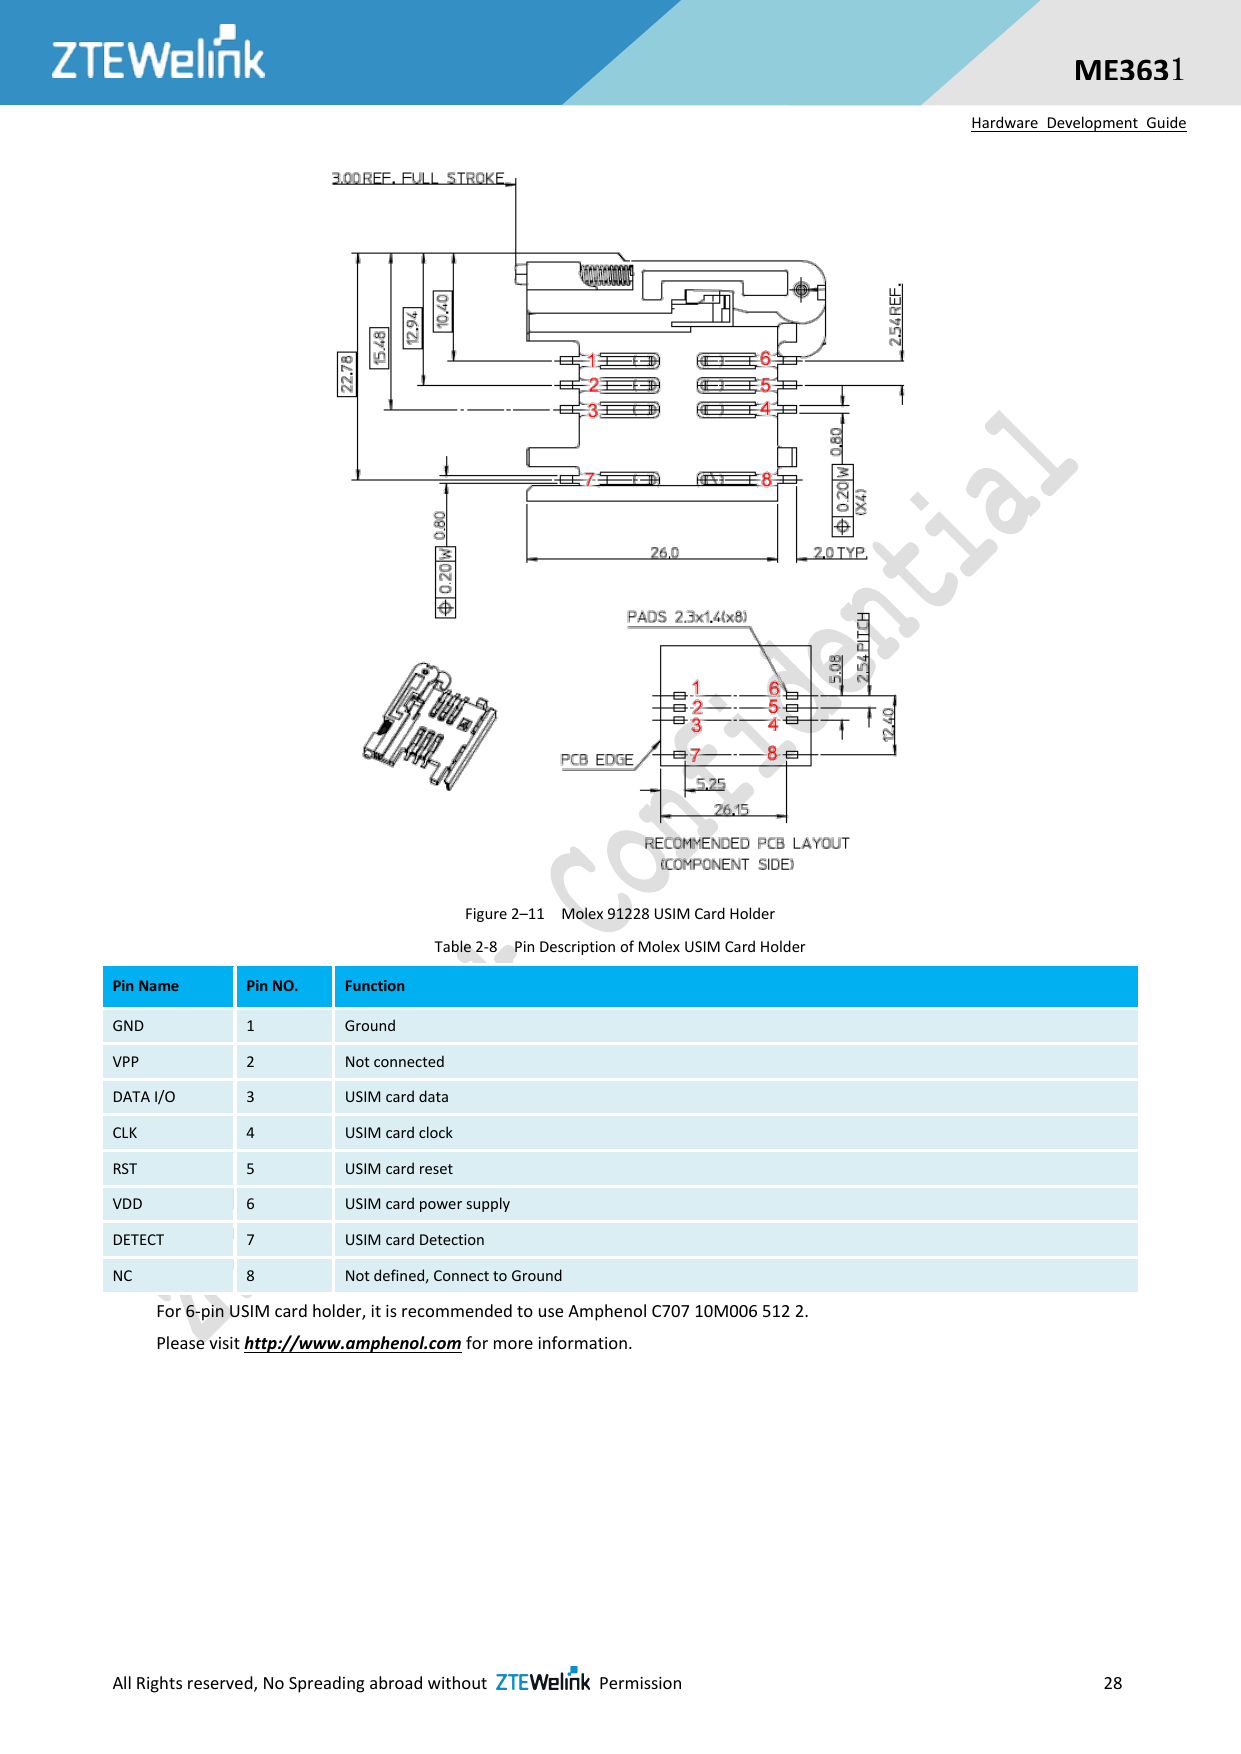  All Rights reserved, No Spreading abroad without    Permission                     28  ME3631 Hardware  Development  Guide  Figure 2–11  Molex 91228 USIM Card Holder   Table 2-8  Pin Description of Molex USIM Card Holder Pin Name Pin NO. Function GND 1 Ground VPP 2 Not connected DATA I/O 3 USIM card data CLK 4 USIM card clock RST 5 USIM card reset VDD 6 USIM card power supply DETECT 7 USIM card Detection NC 8 Not defined, Connect to Ground For 6-pin USIM card holder, it is recommended to use Amphenol C707 10M006 512 2.     Please visit http://www.amphenol.com for more information. 